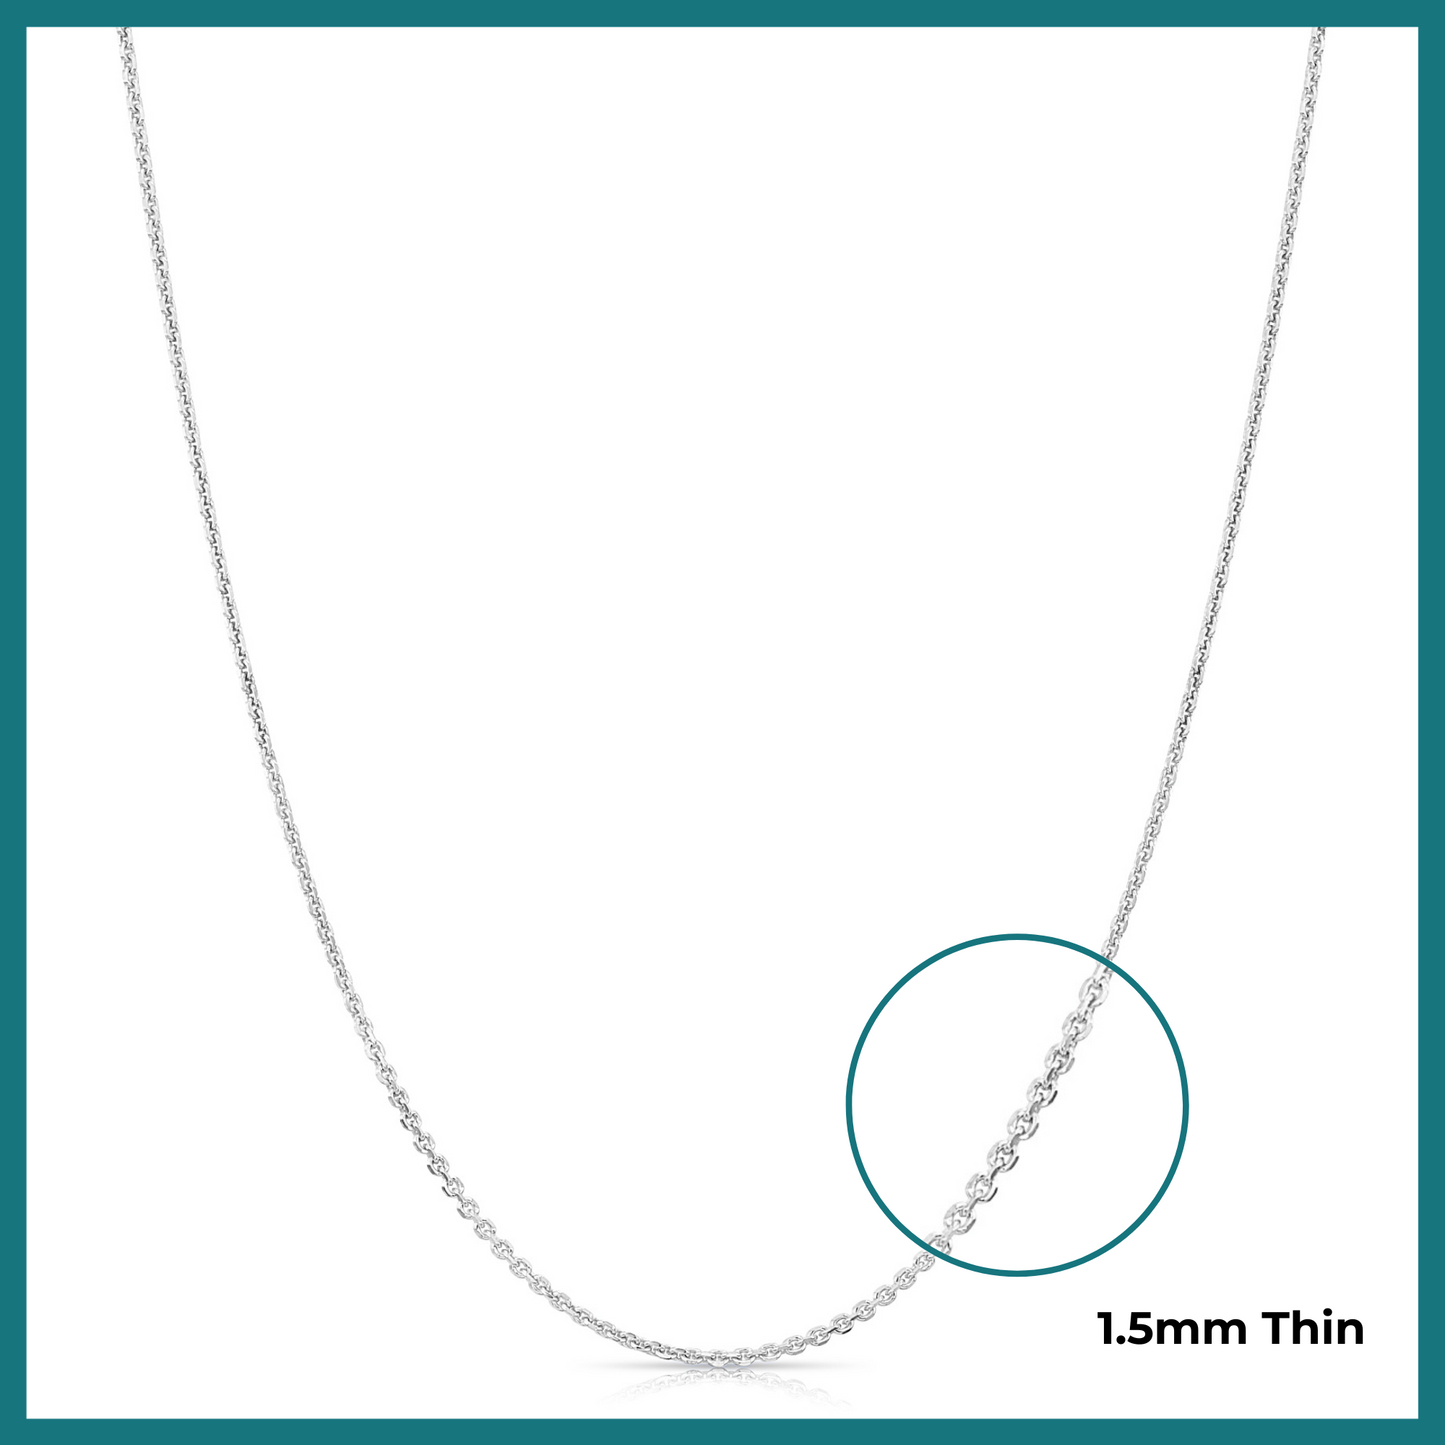 14k Solid White Gold Diamond-Cut Cable Chain Necklace 16 18 20Inch, Thin and Dainty Cable Chain